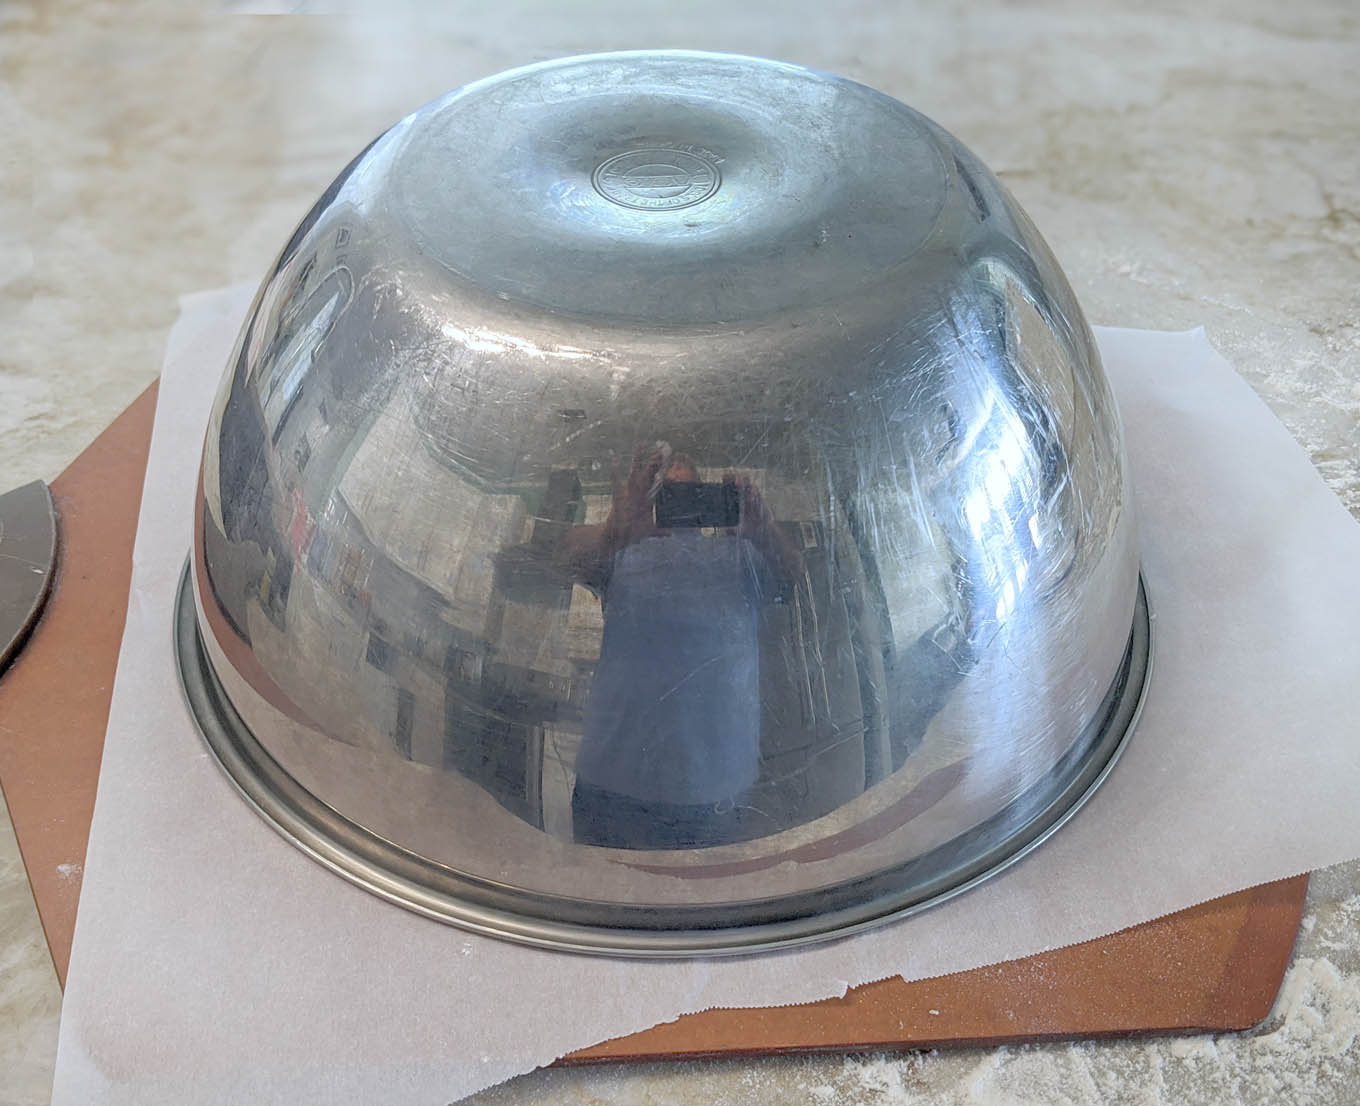 stainless steel bowl covering the bread dough on the pizza peel